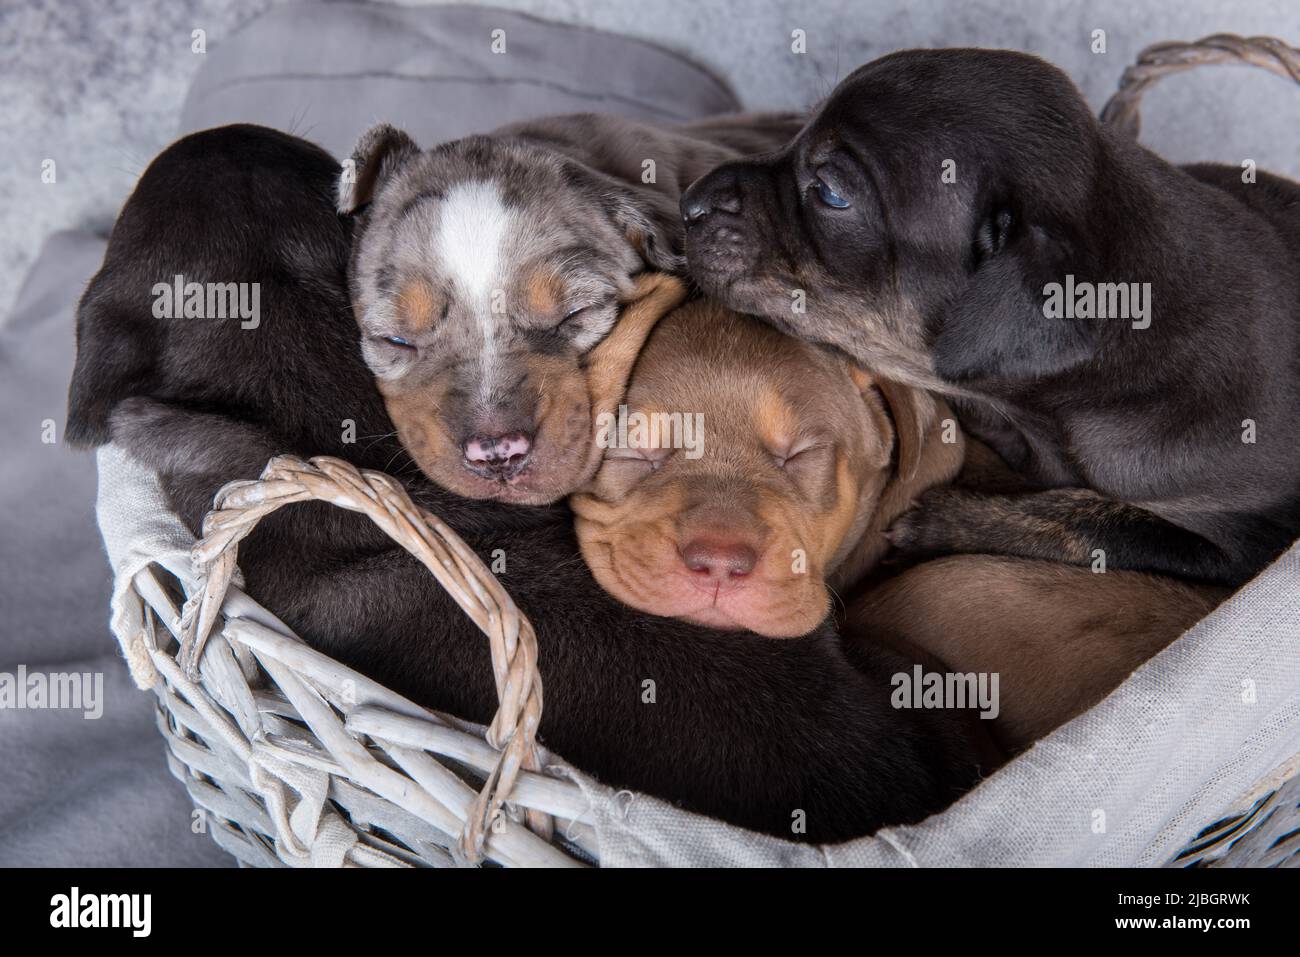 Four Louisiana Catahoula Leopard Dogs puppies on gray background Stock Photo